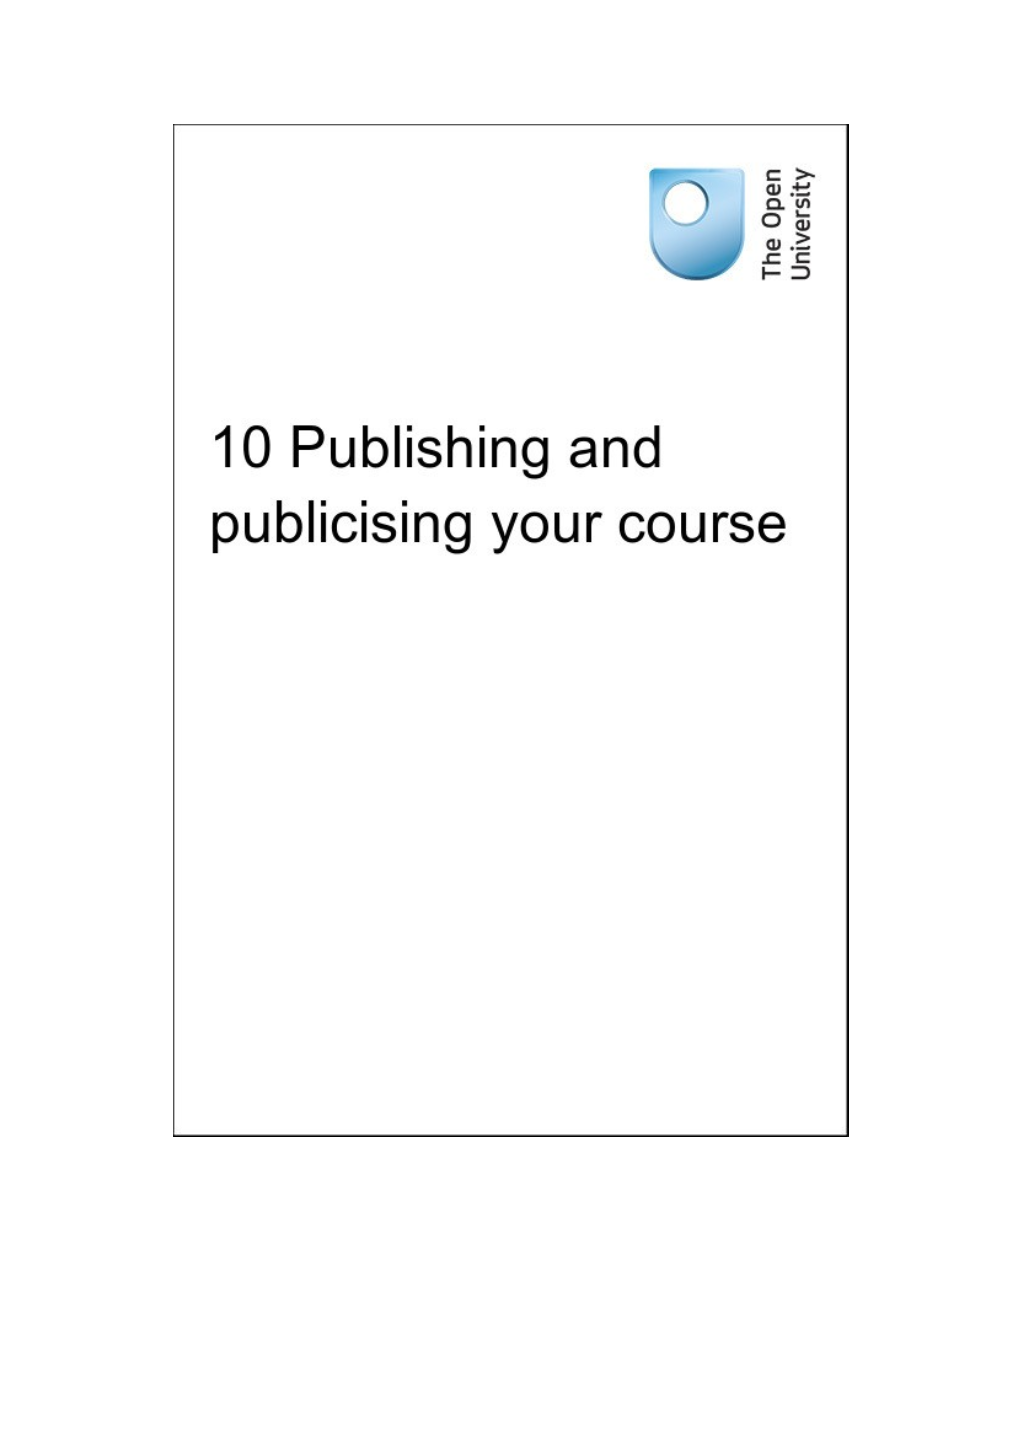 10 Publishing and Publicising Your Course